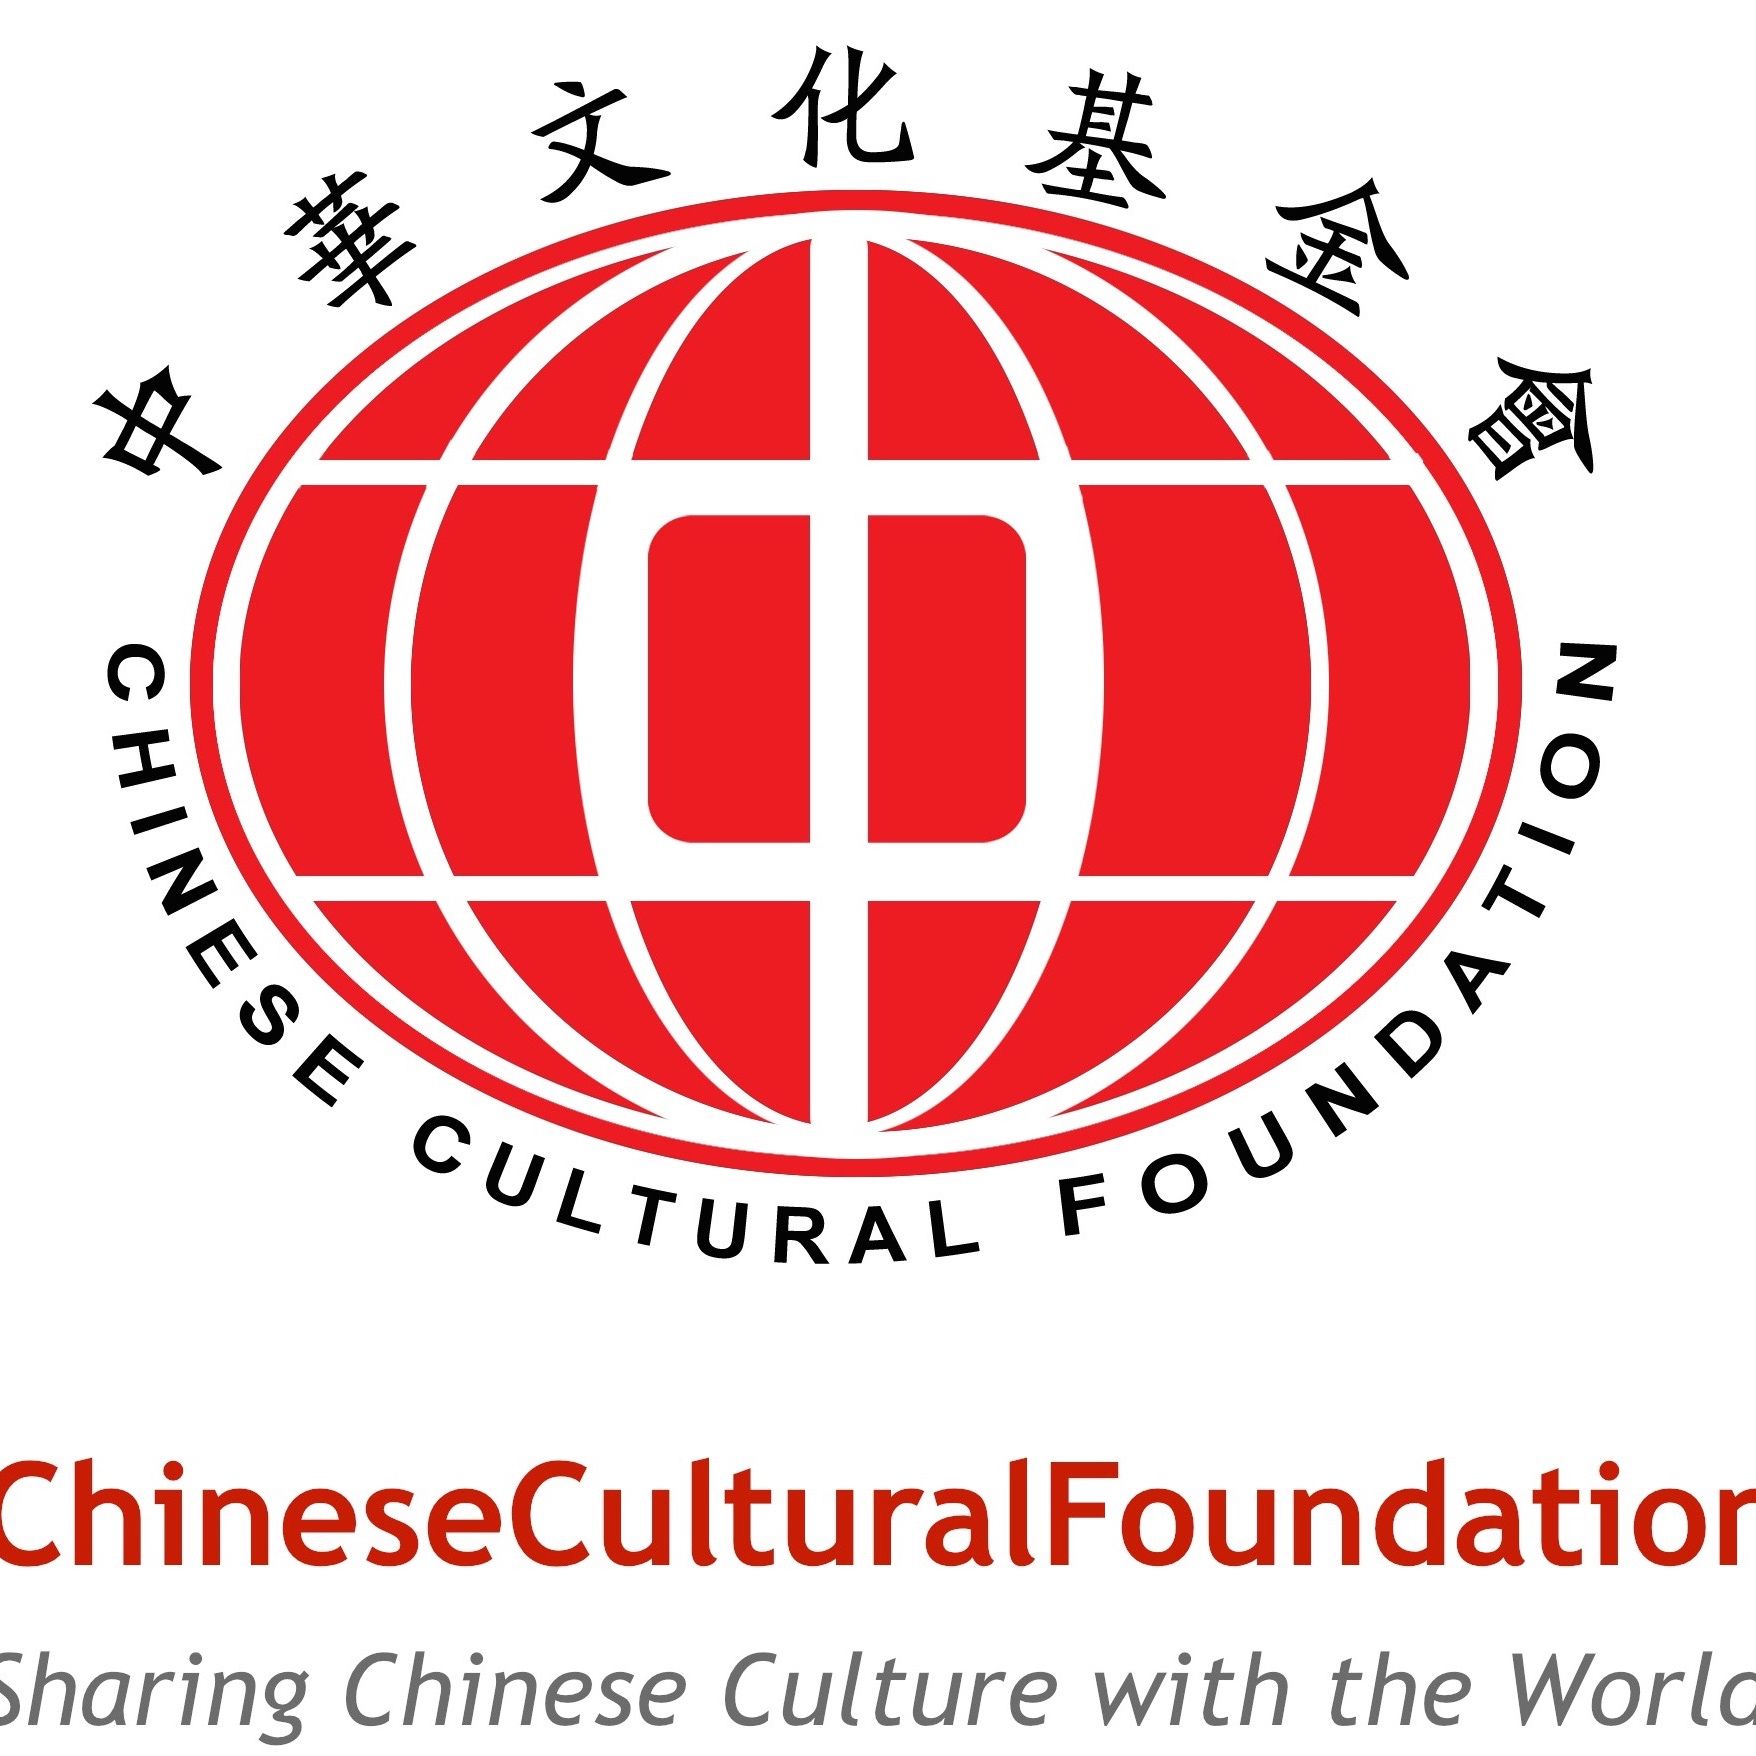 Chinese Organization in New York New York - Chinese Cultural Foundation